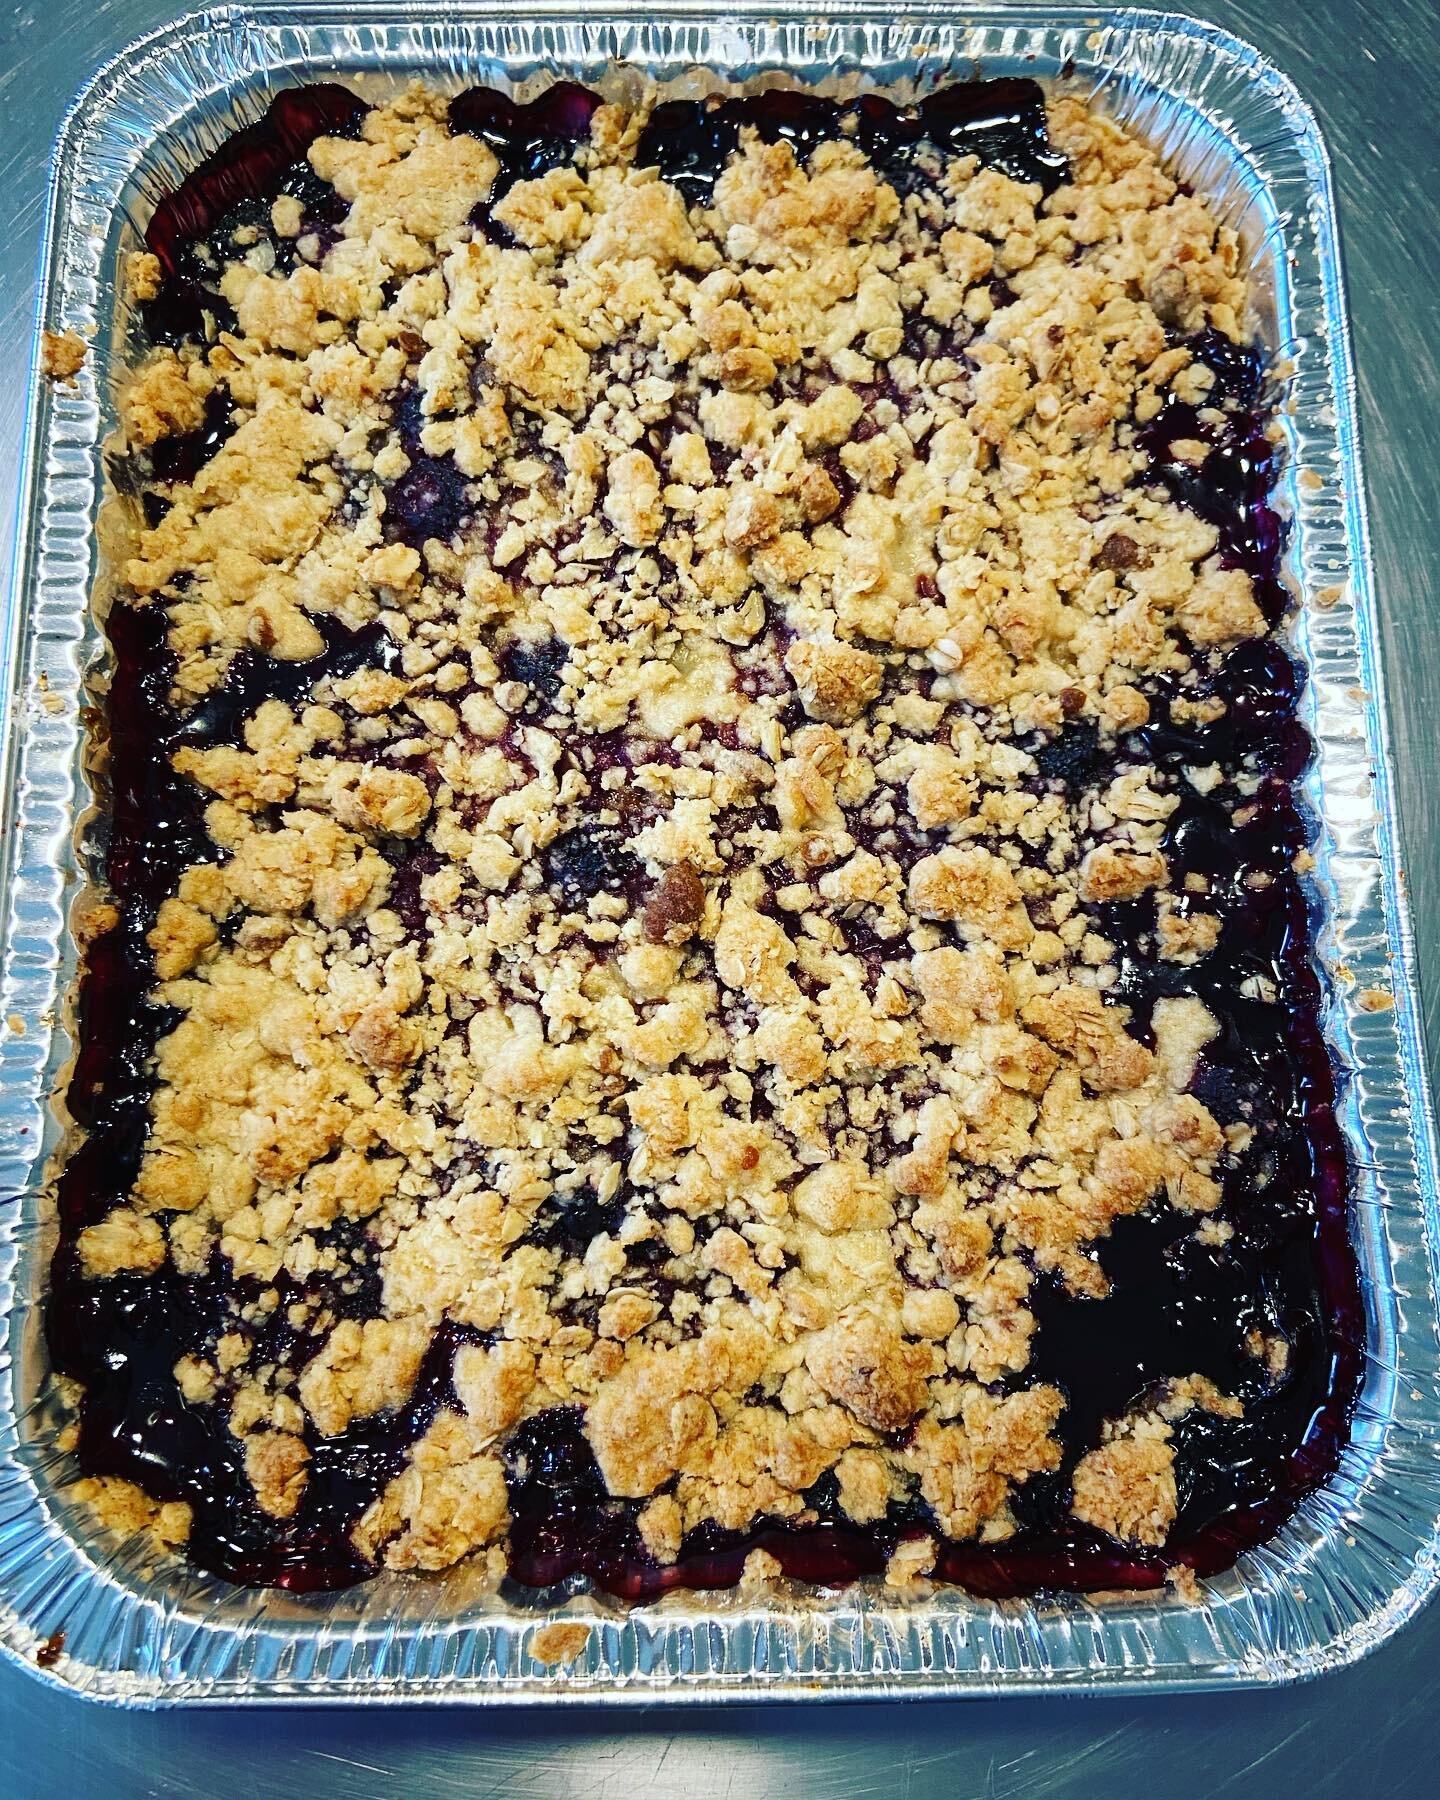 Mixed berry cobbler! Triple berry, lemon, oatmeal crumble. Special order for today.

#ctcatering #cteats #supportsmallbusiness #ctsmallbusiness #newhaveneats